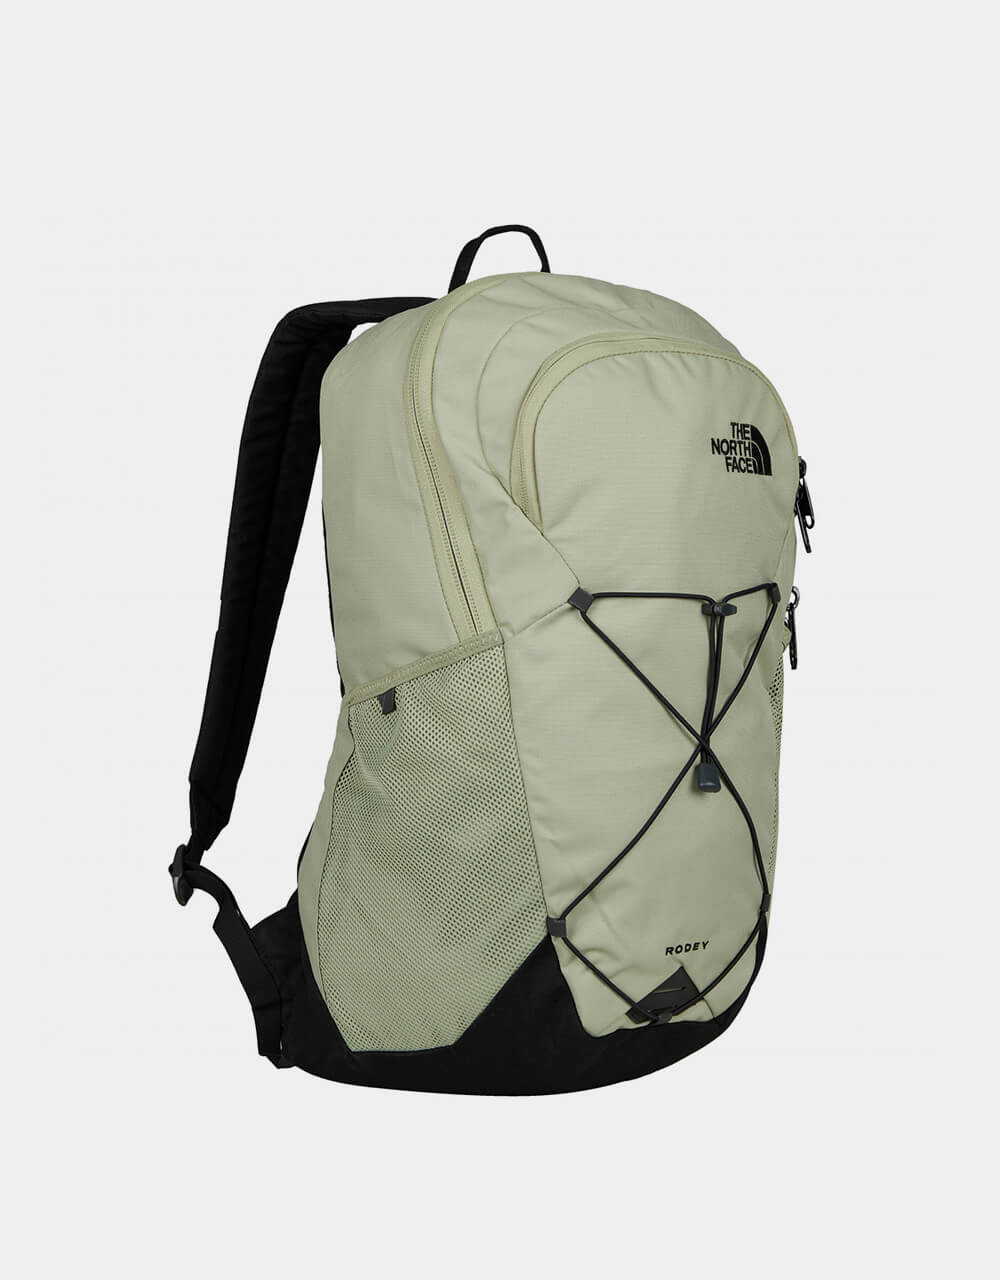 The North Face Rodey Backpack - Tea Green/TNF Black